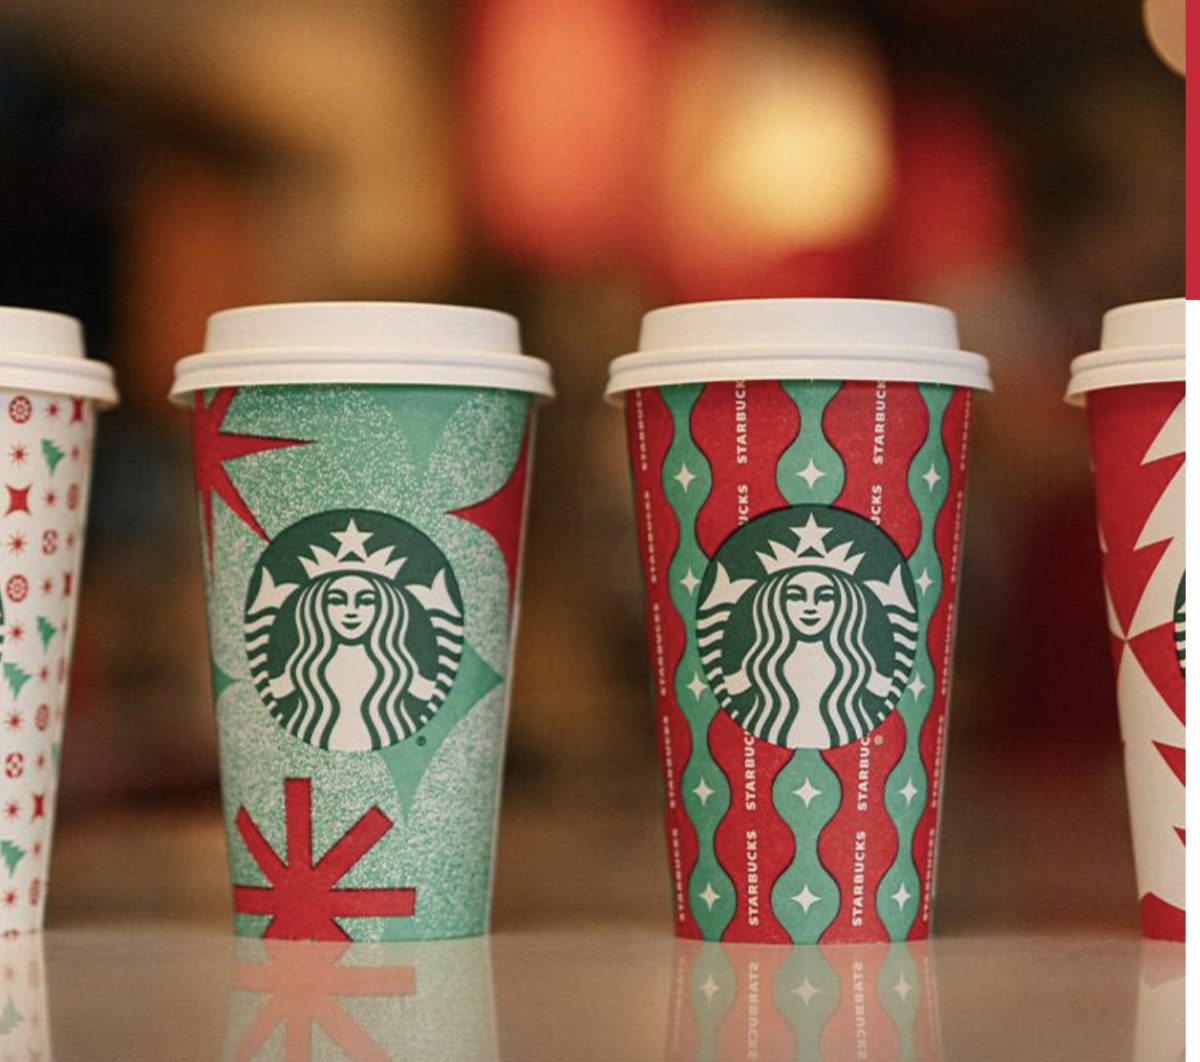 Starbucks releases 2023 holiday season cup designs. Where to find them